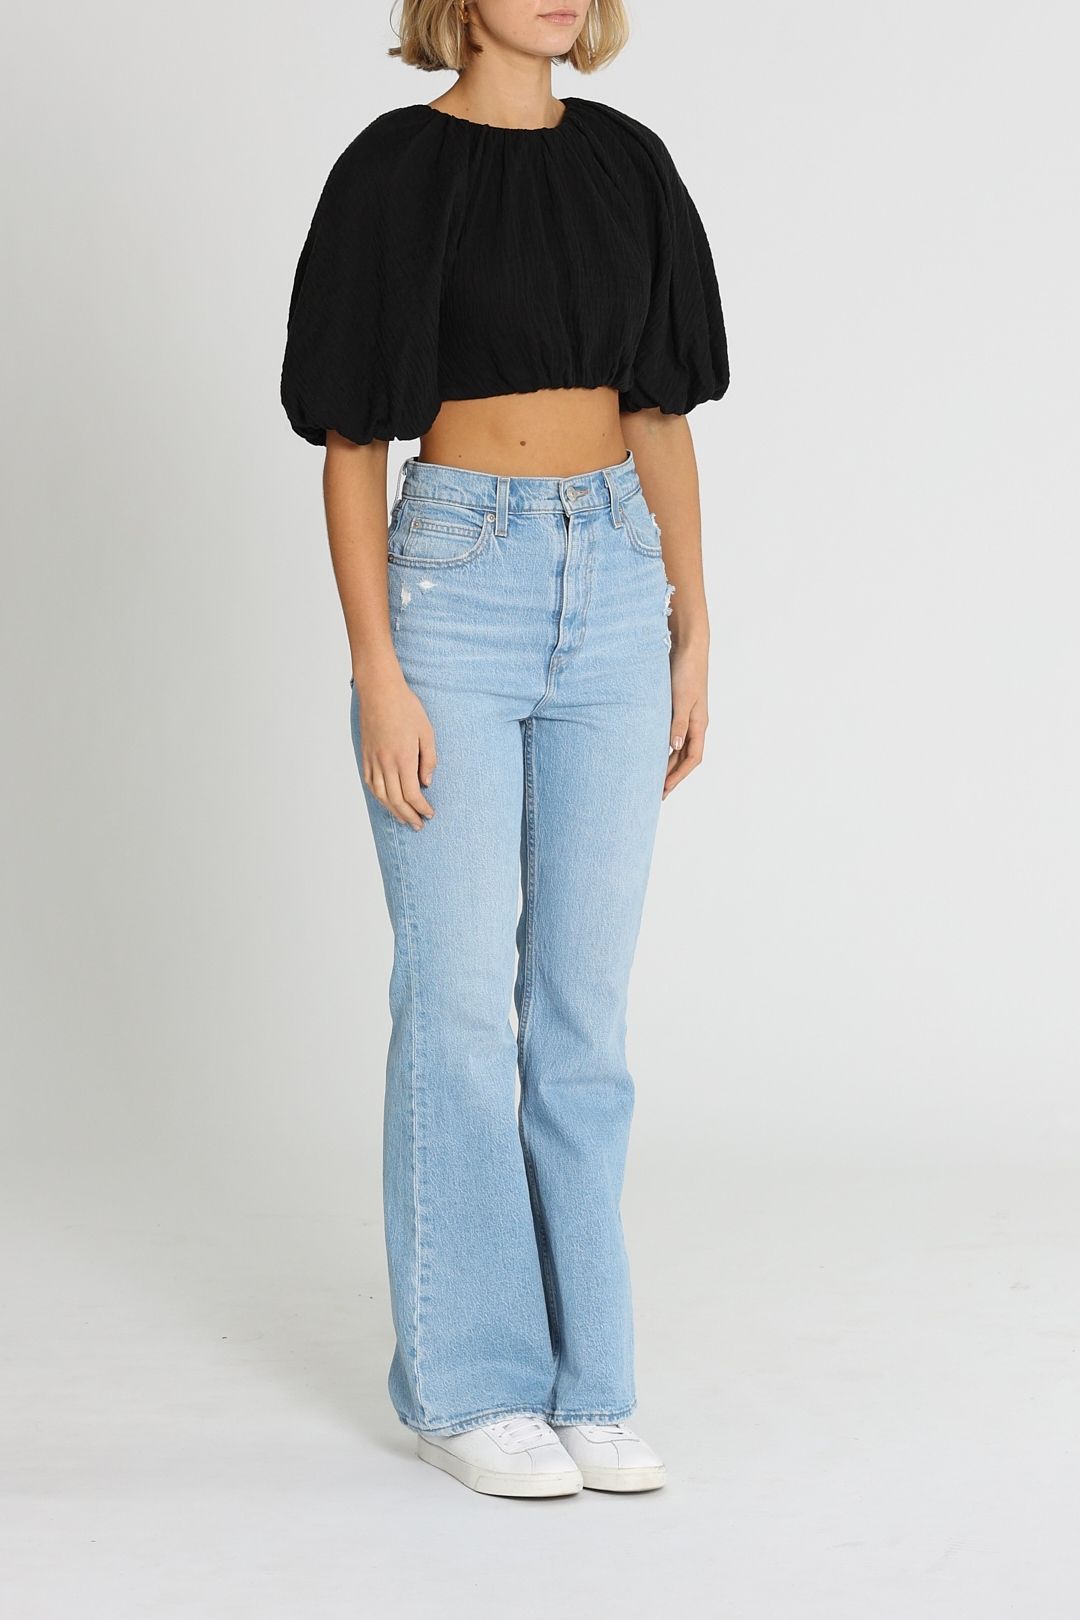 AJE Admiration Lace Black Cropped